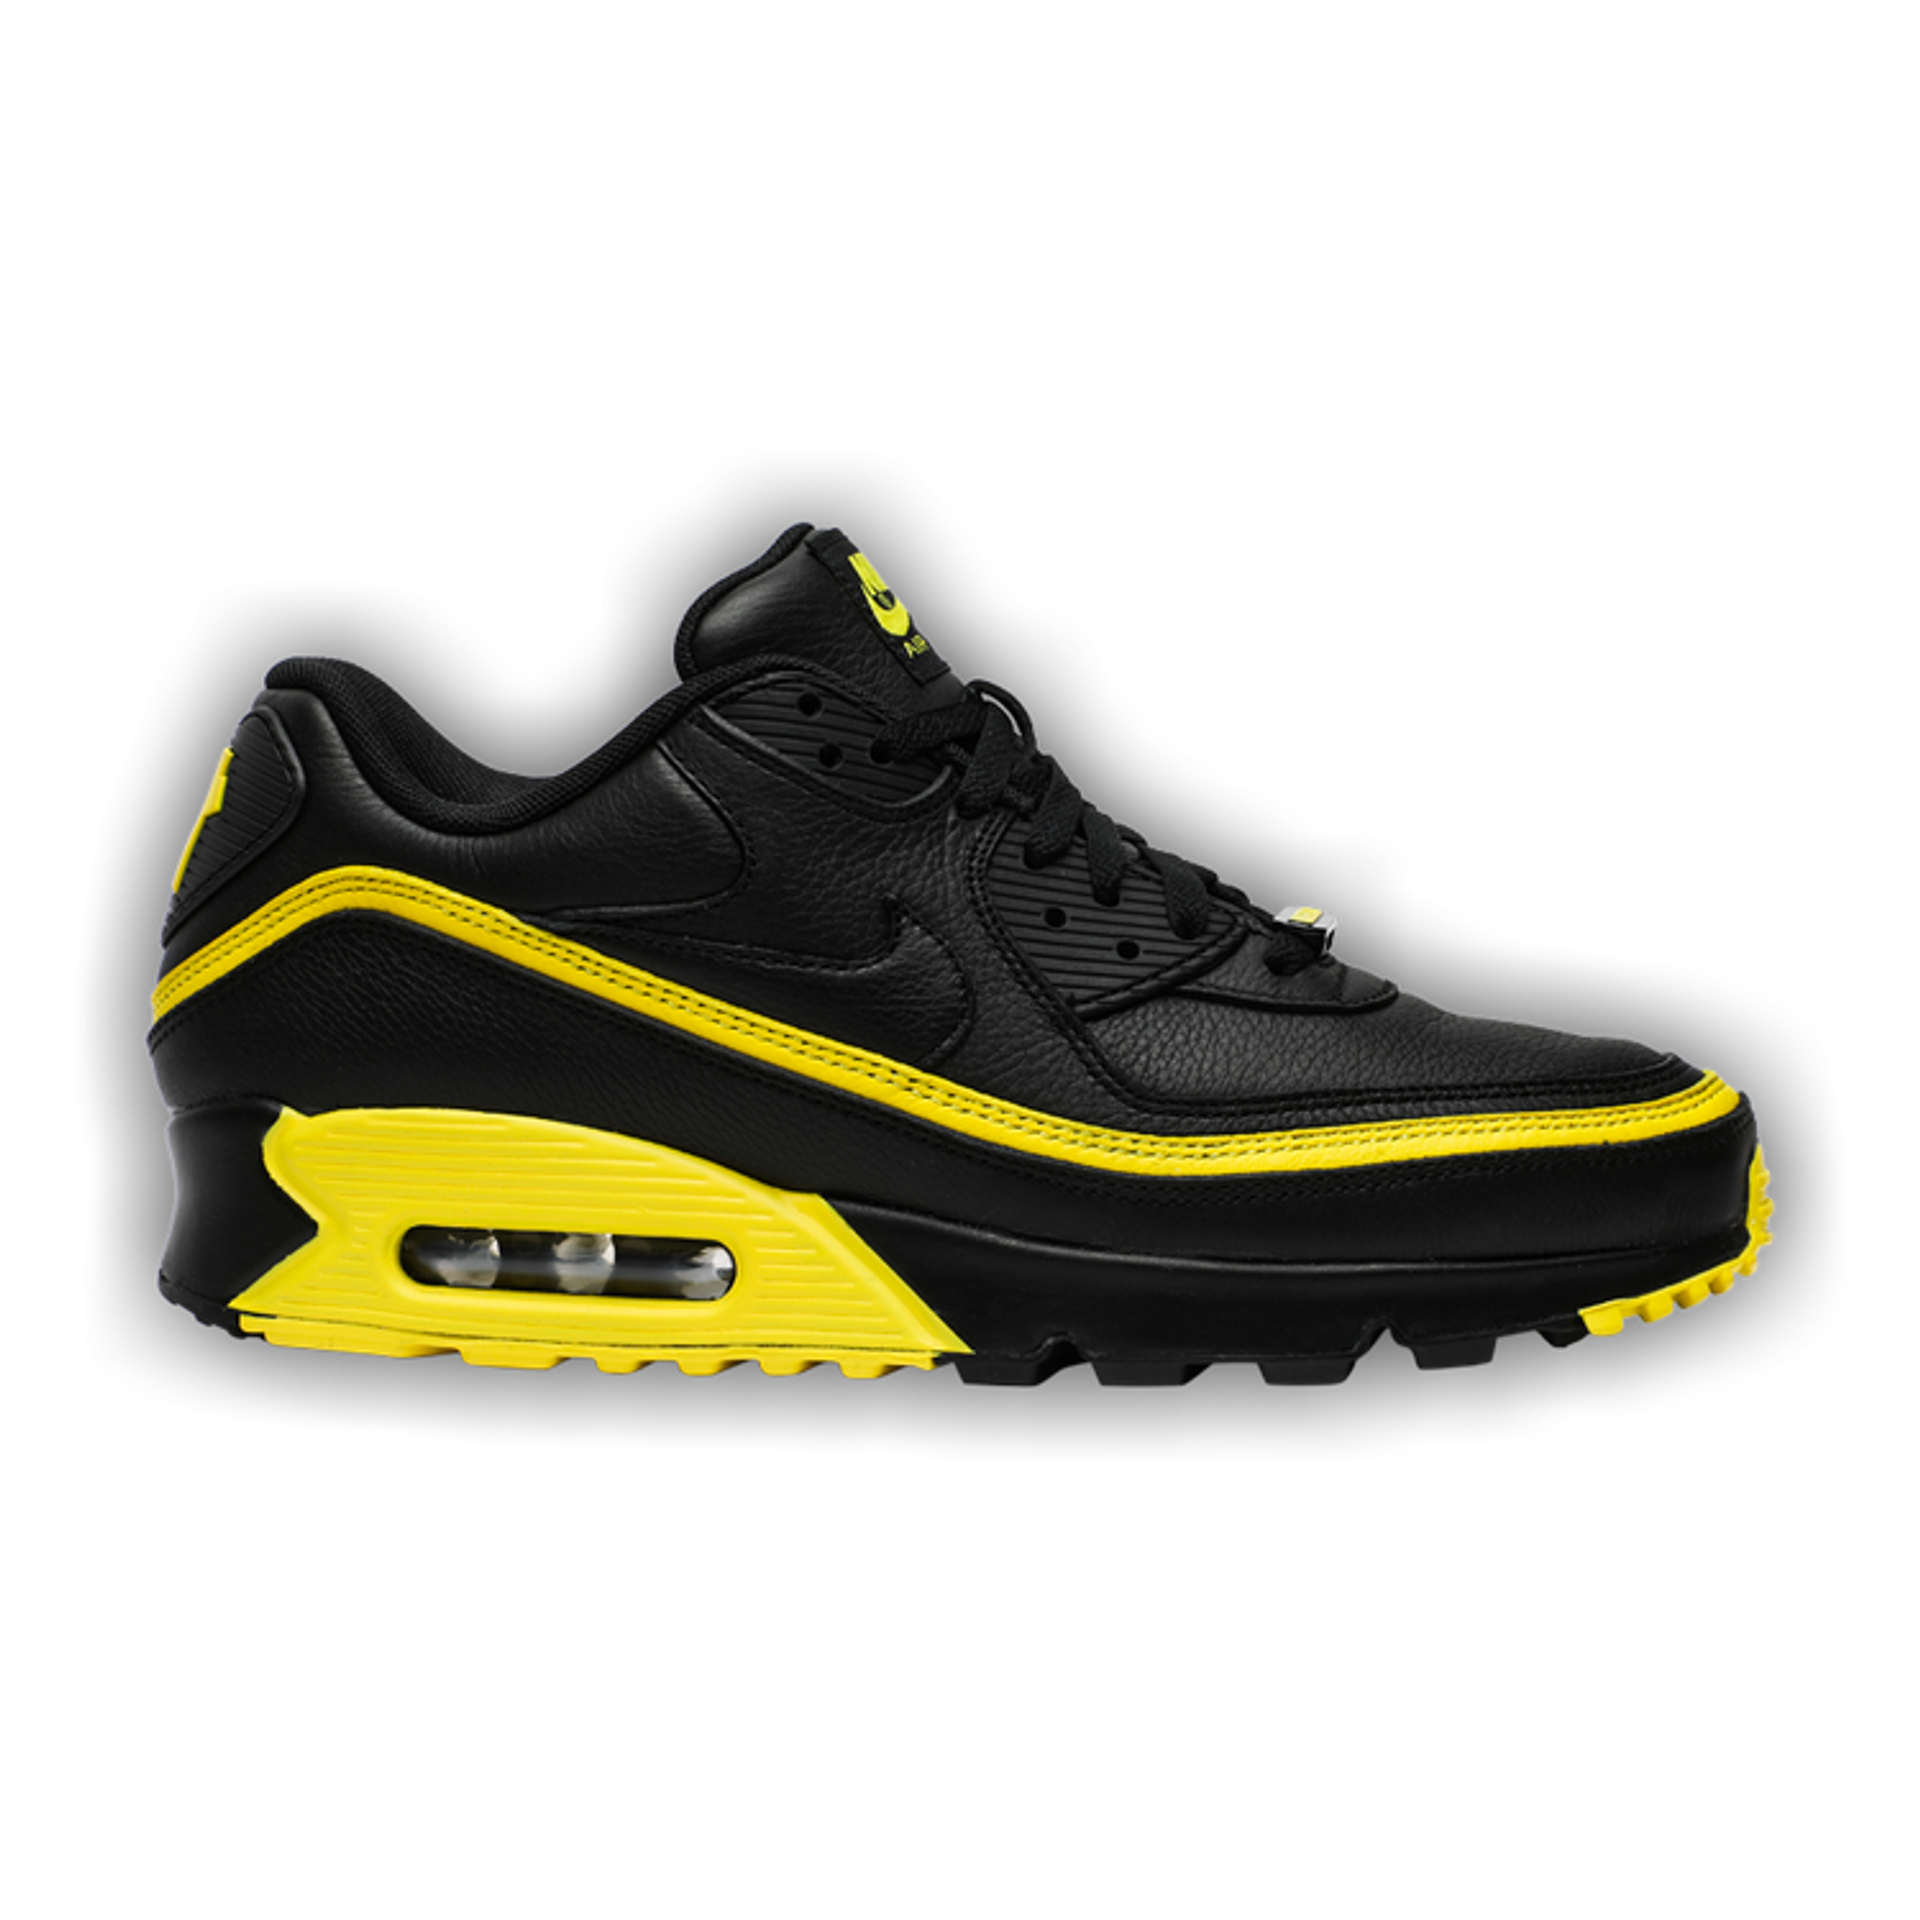 Nike Undefeated x Air Max 90 'Black Optic Yellow'